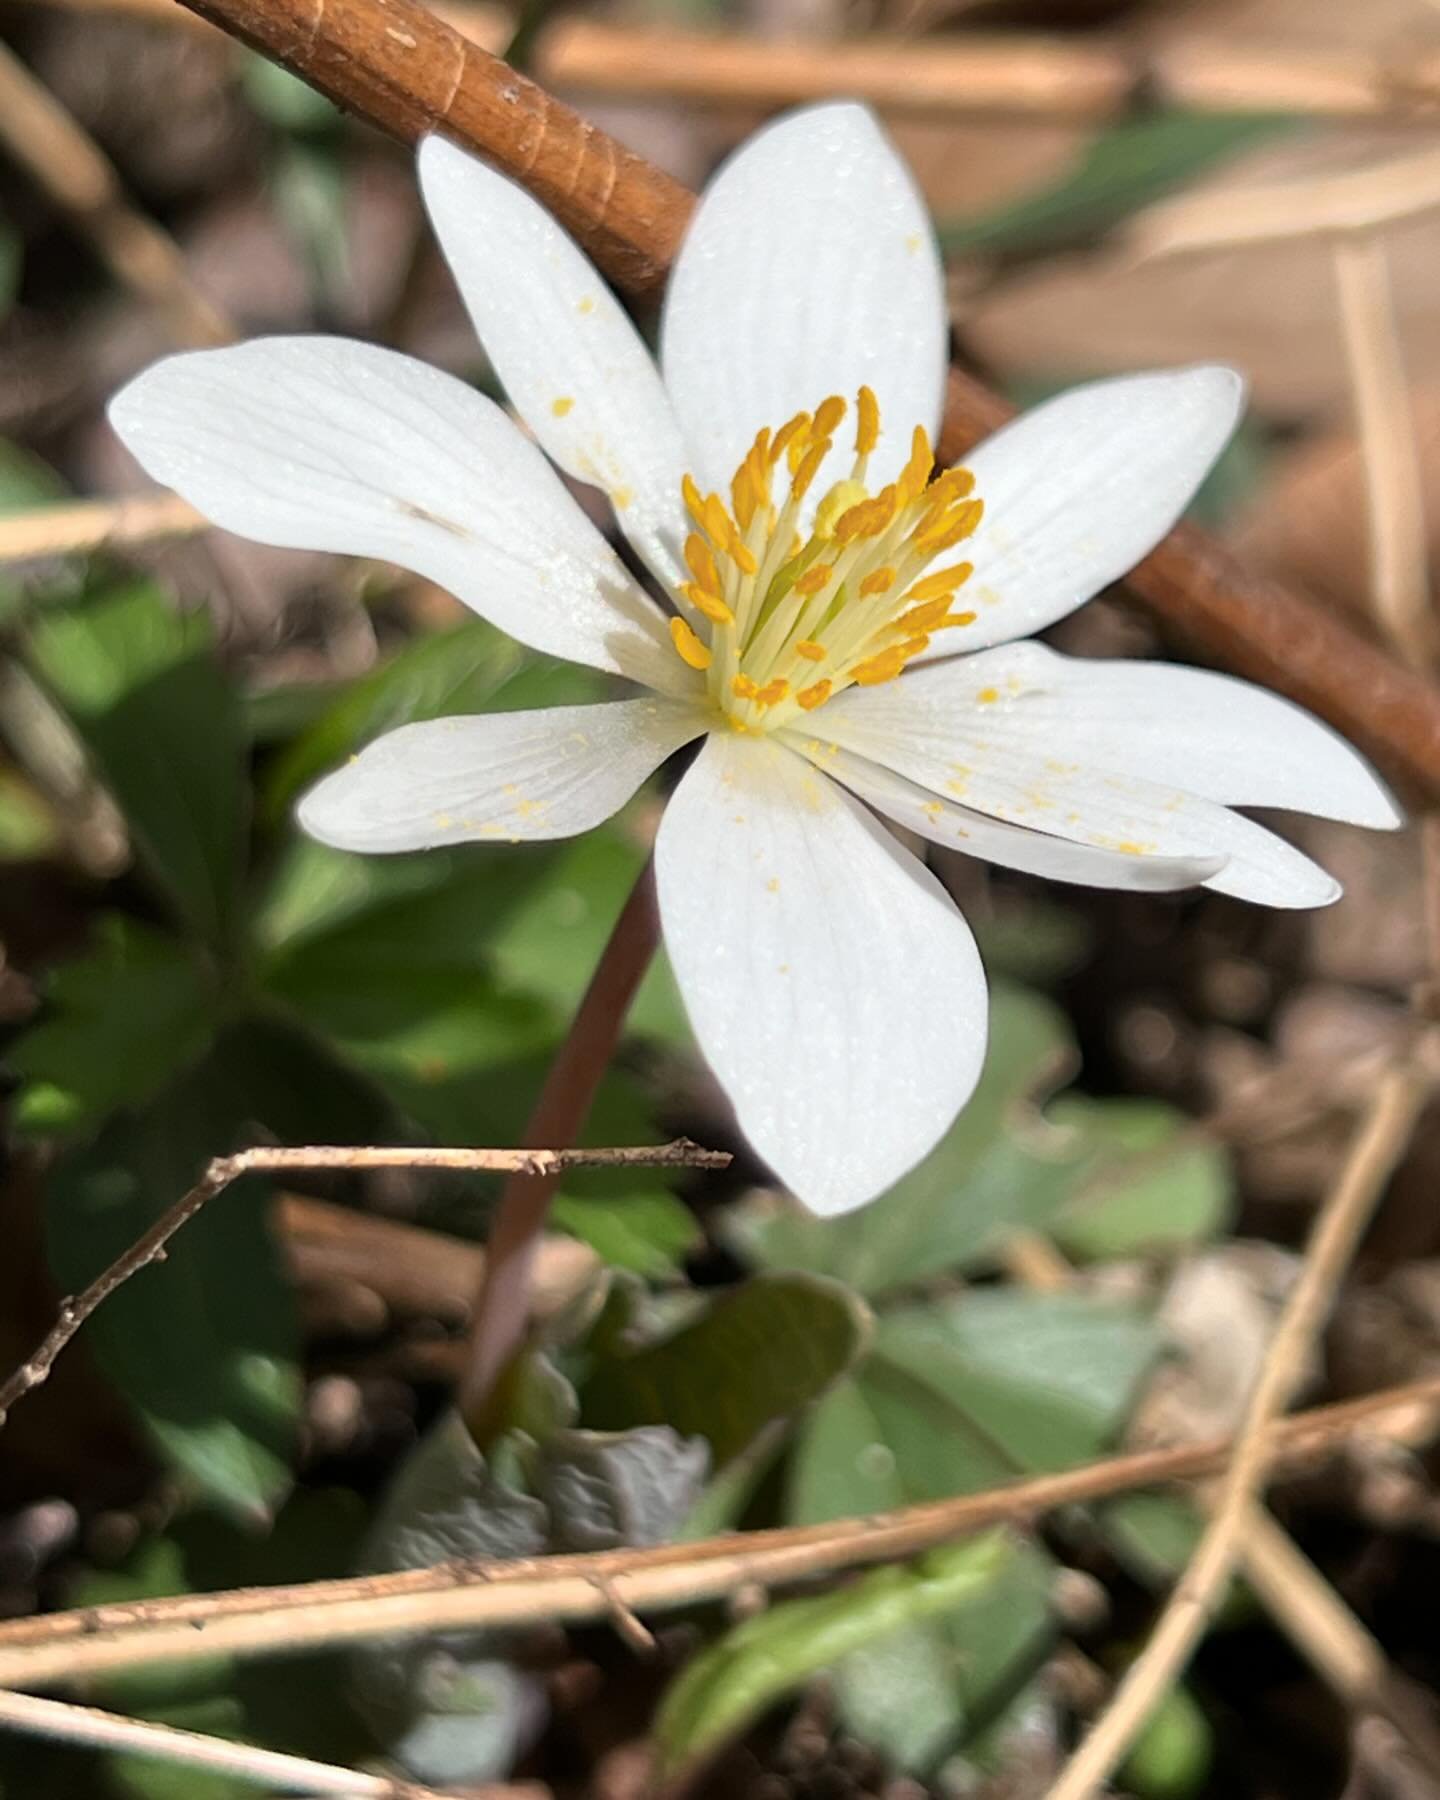 I saw my first bloodroot of the season, #bluebells in bud and #woodrush getting ready to flower, right before I started viewing the #eclipse 

What could be better? I hope you get to enjoy some nature today!

#sanguinariacandensis #bloodroot #virgini